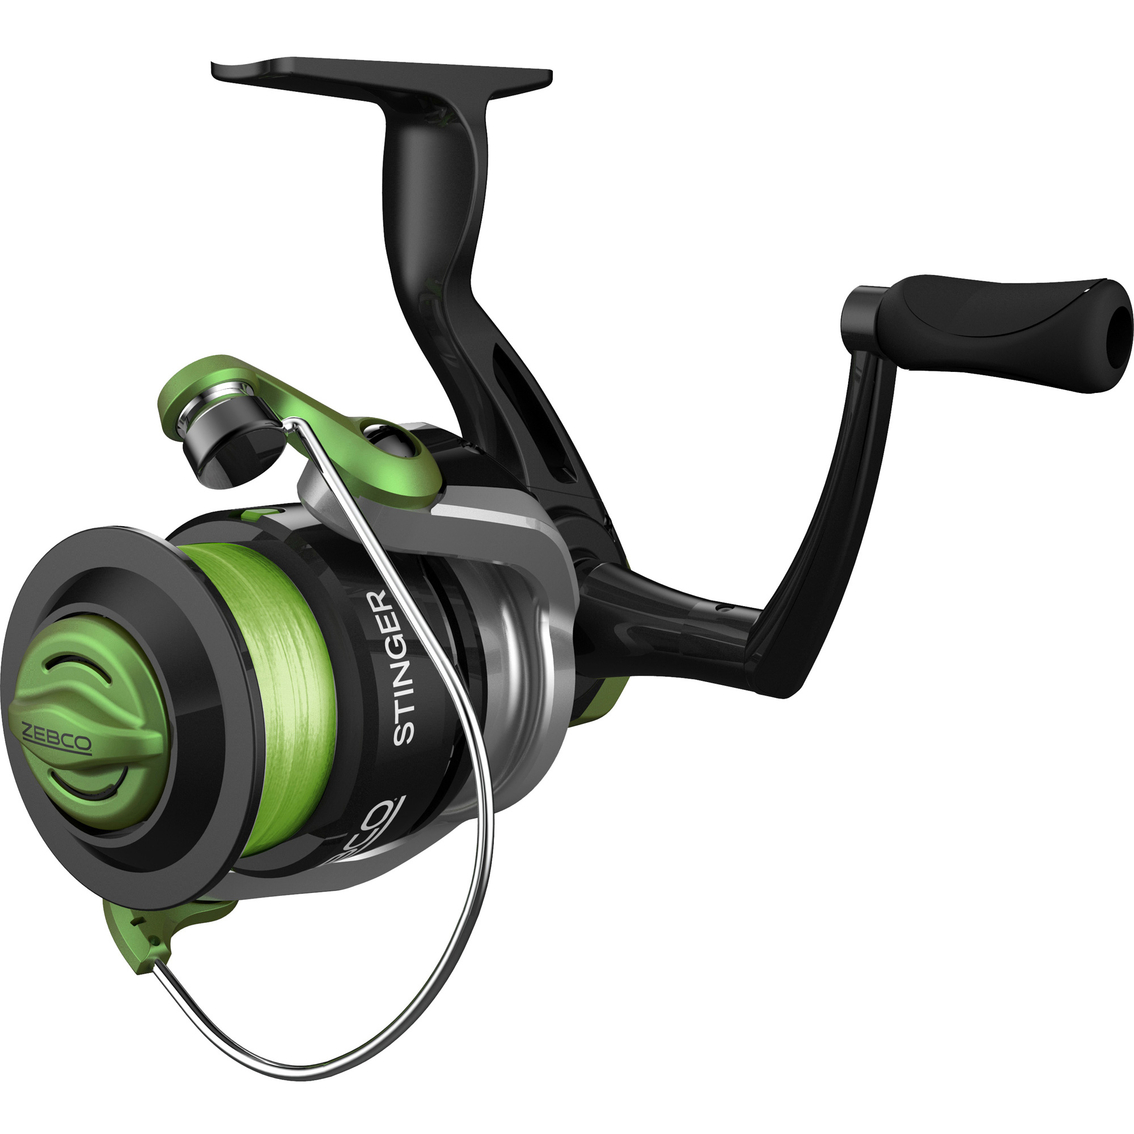 Zebco Stinger 50SZ 702MH Spinning Combo - Image 2 of 5